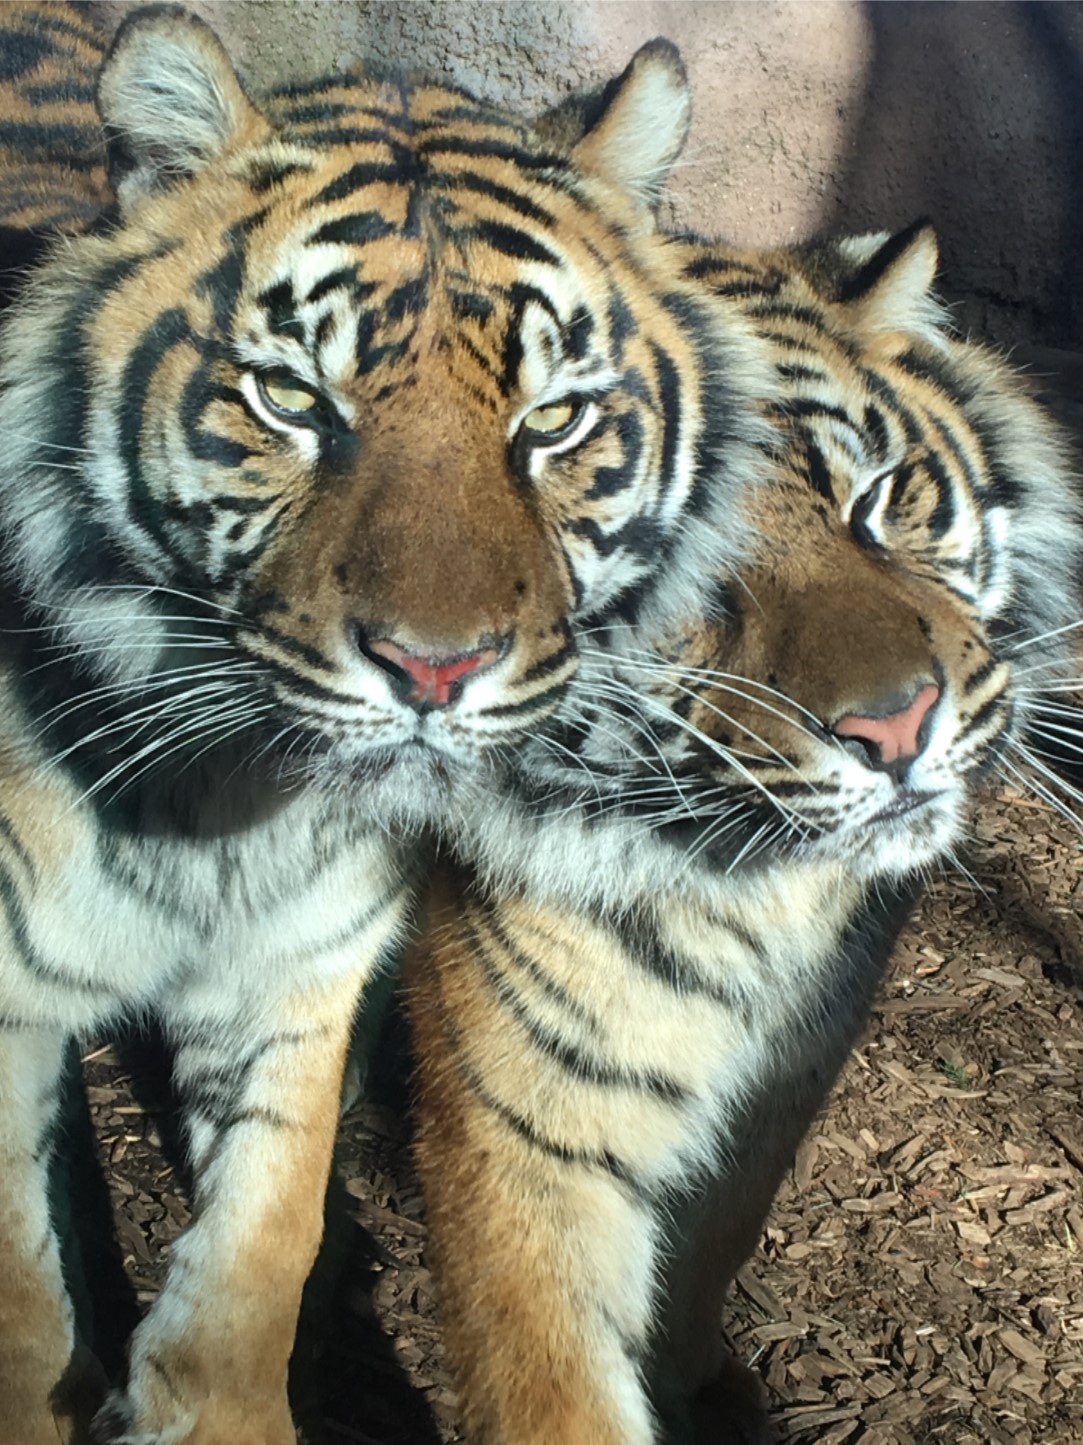 May the Fourth be with You! Three Sumatran Tiger cubs, ChloJo, Shanti, and Raza, were born to mother, Jingga, and father, Rojo, on the fourth of May 2014.